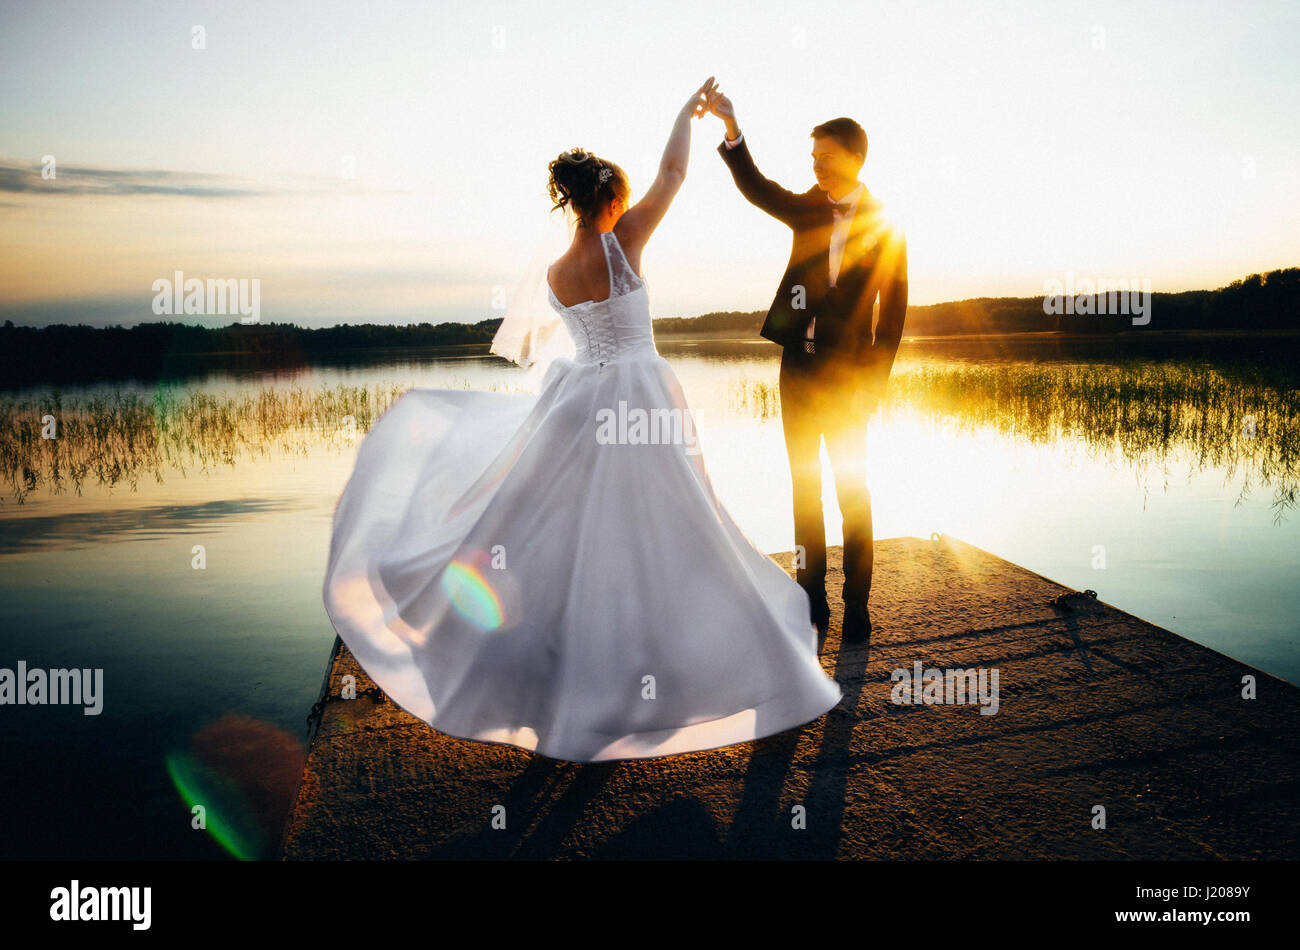 Bride is spinning in a white dress holding hand the groom on the bank of the lake at sunset with sunshine and sunlight Stock Photo